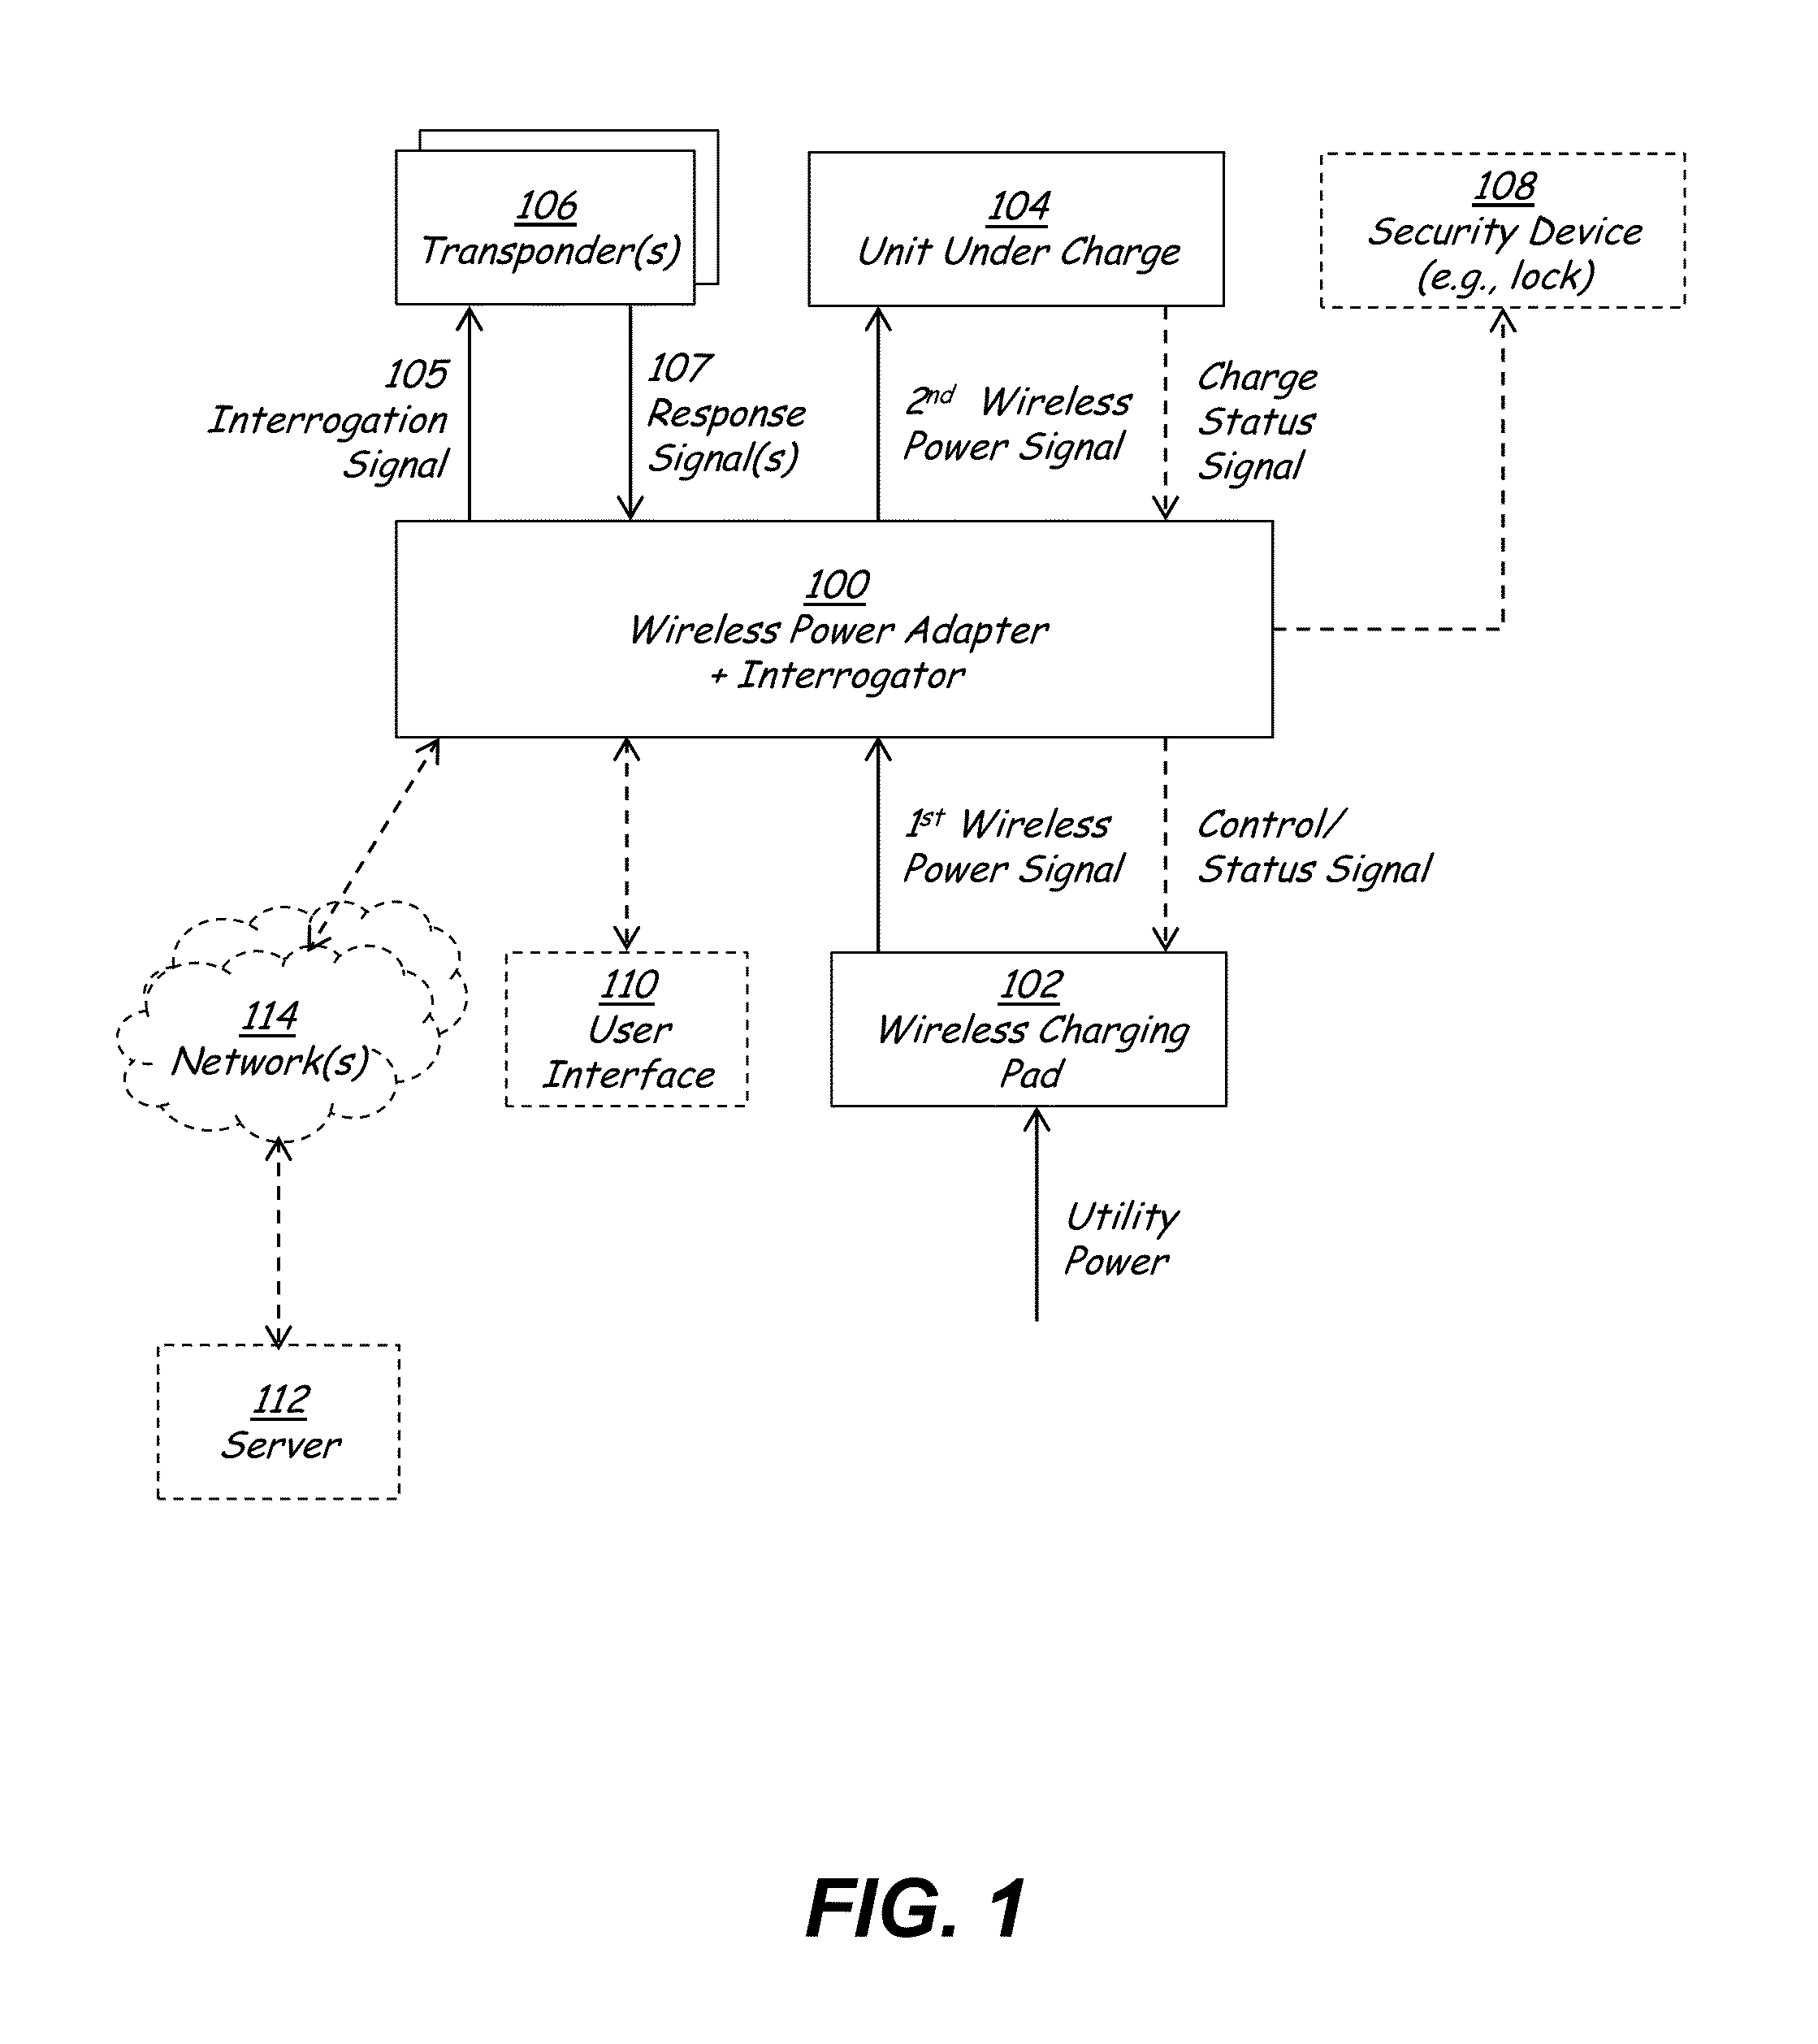 Wireless interrogation and wireless charging of electronic devices